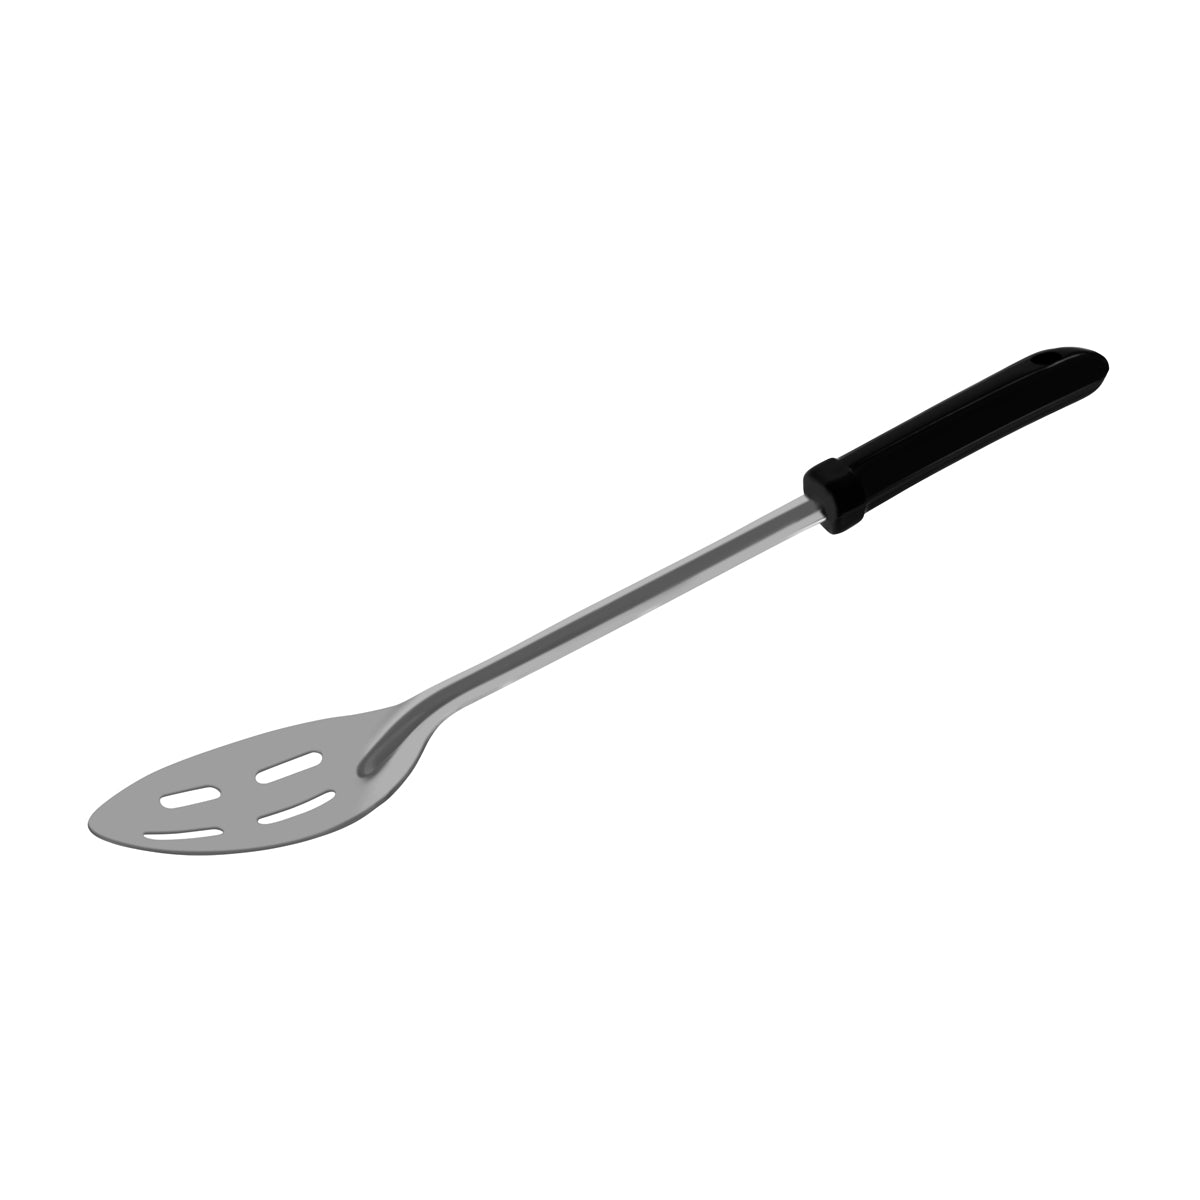 36135 Chef Inox Spoon Basting Slotted with Polypropylene Handle 380mm Tomkin Australia Hospitality Supplies